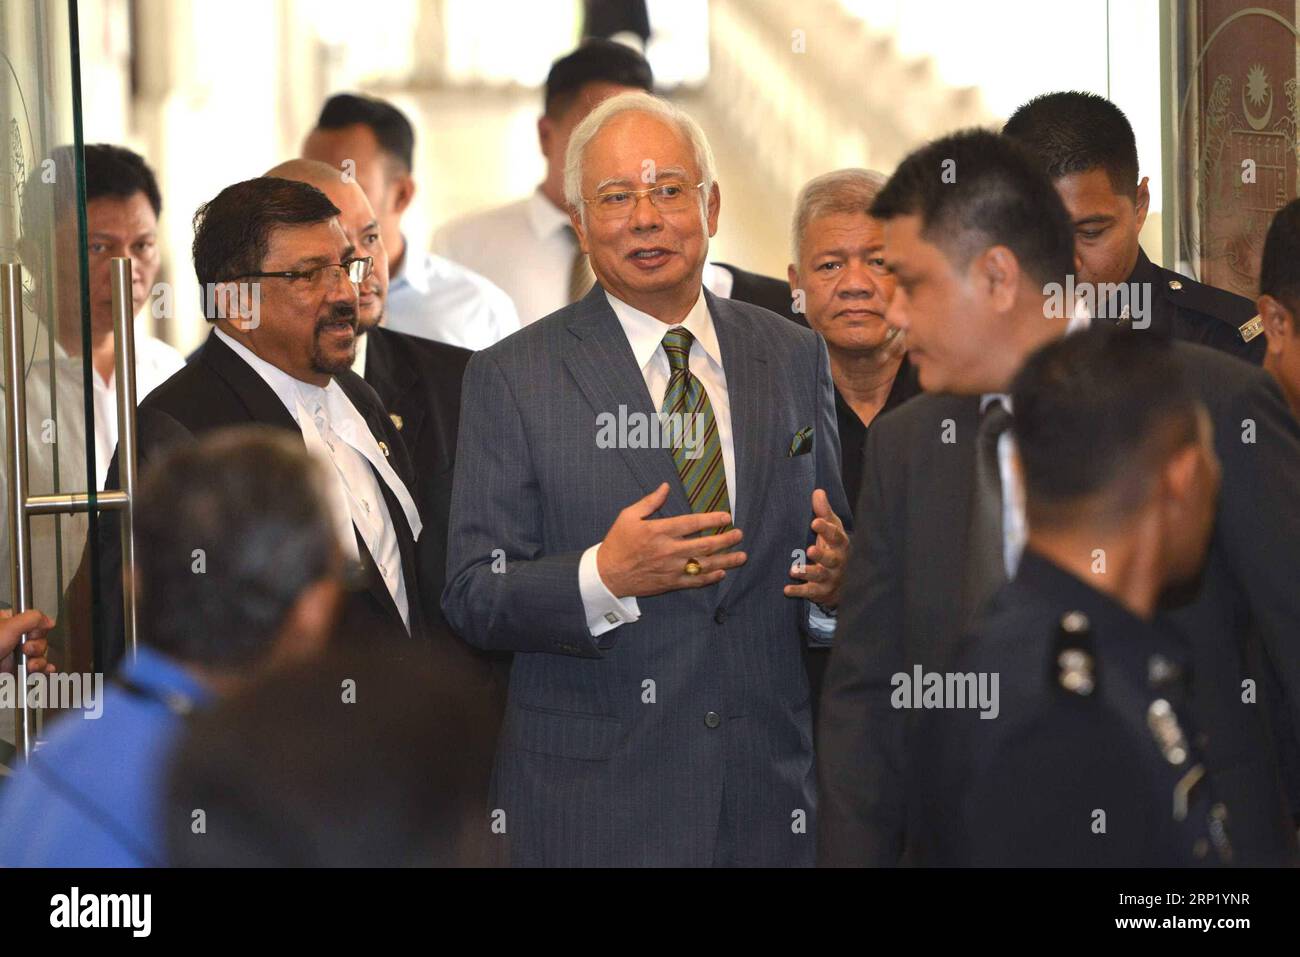 (180808) -- KUALA LUMPUR, Aug. 8, 2018 -- Former Malaysian Prime Minister Najib Razak (C) appears at the Kuala Lumpur Courts complex in Kuala Lumpur in Malaysia, Aug. 8, 2018. Former Malaysian Prime Minister Najib Razak on Wednesday was charged with three offenses related to money-laundering and anti-terrorism financing, in addition to several counts of criminal breach of trust and corruption charges that were served in early July. ) (lrz) MALAYSIA-KUALA LUMPUR-NAJIB-CHARGES ChongxVoonxChung PUBLICATIONxNOTxINxCHN Stock Photo